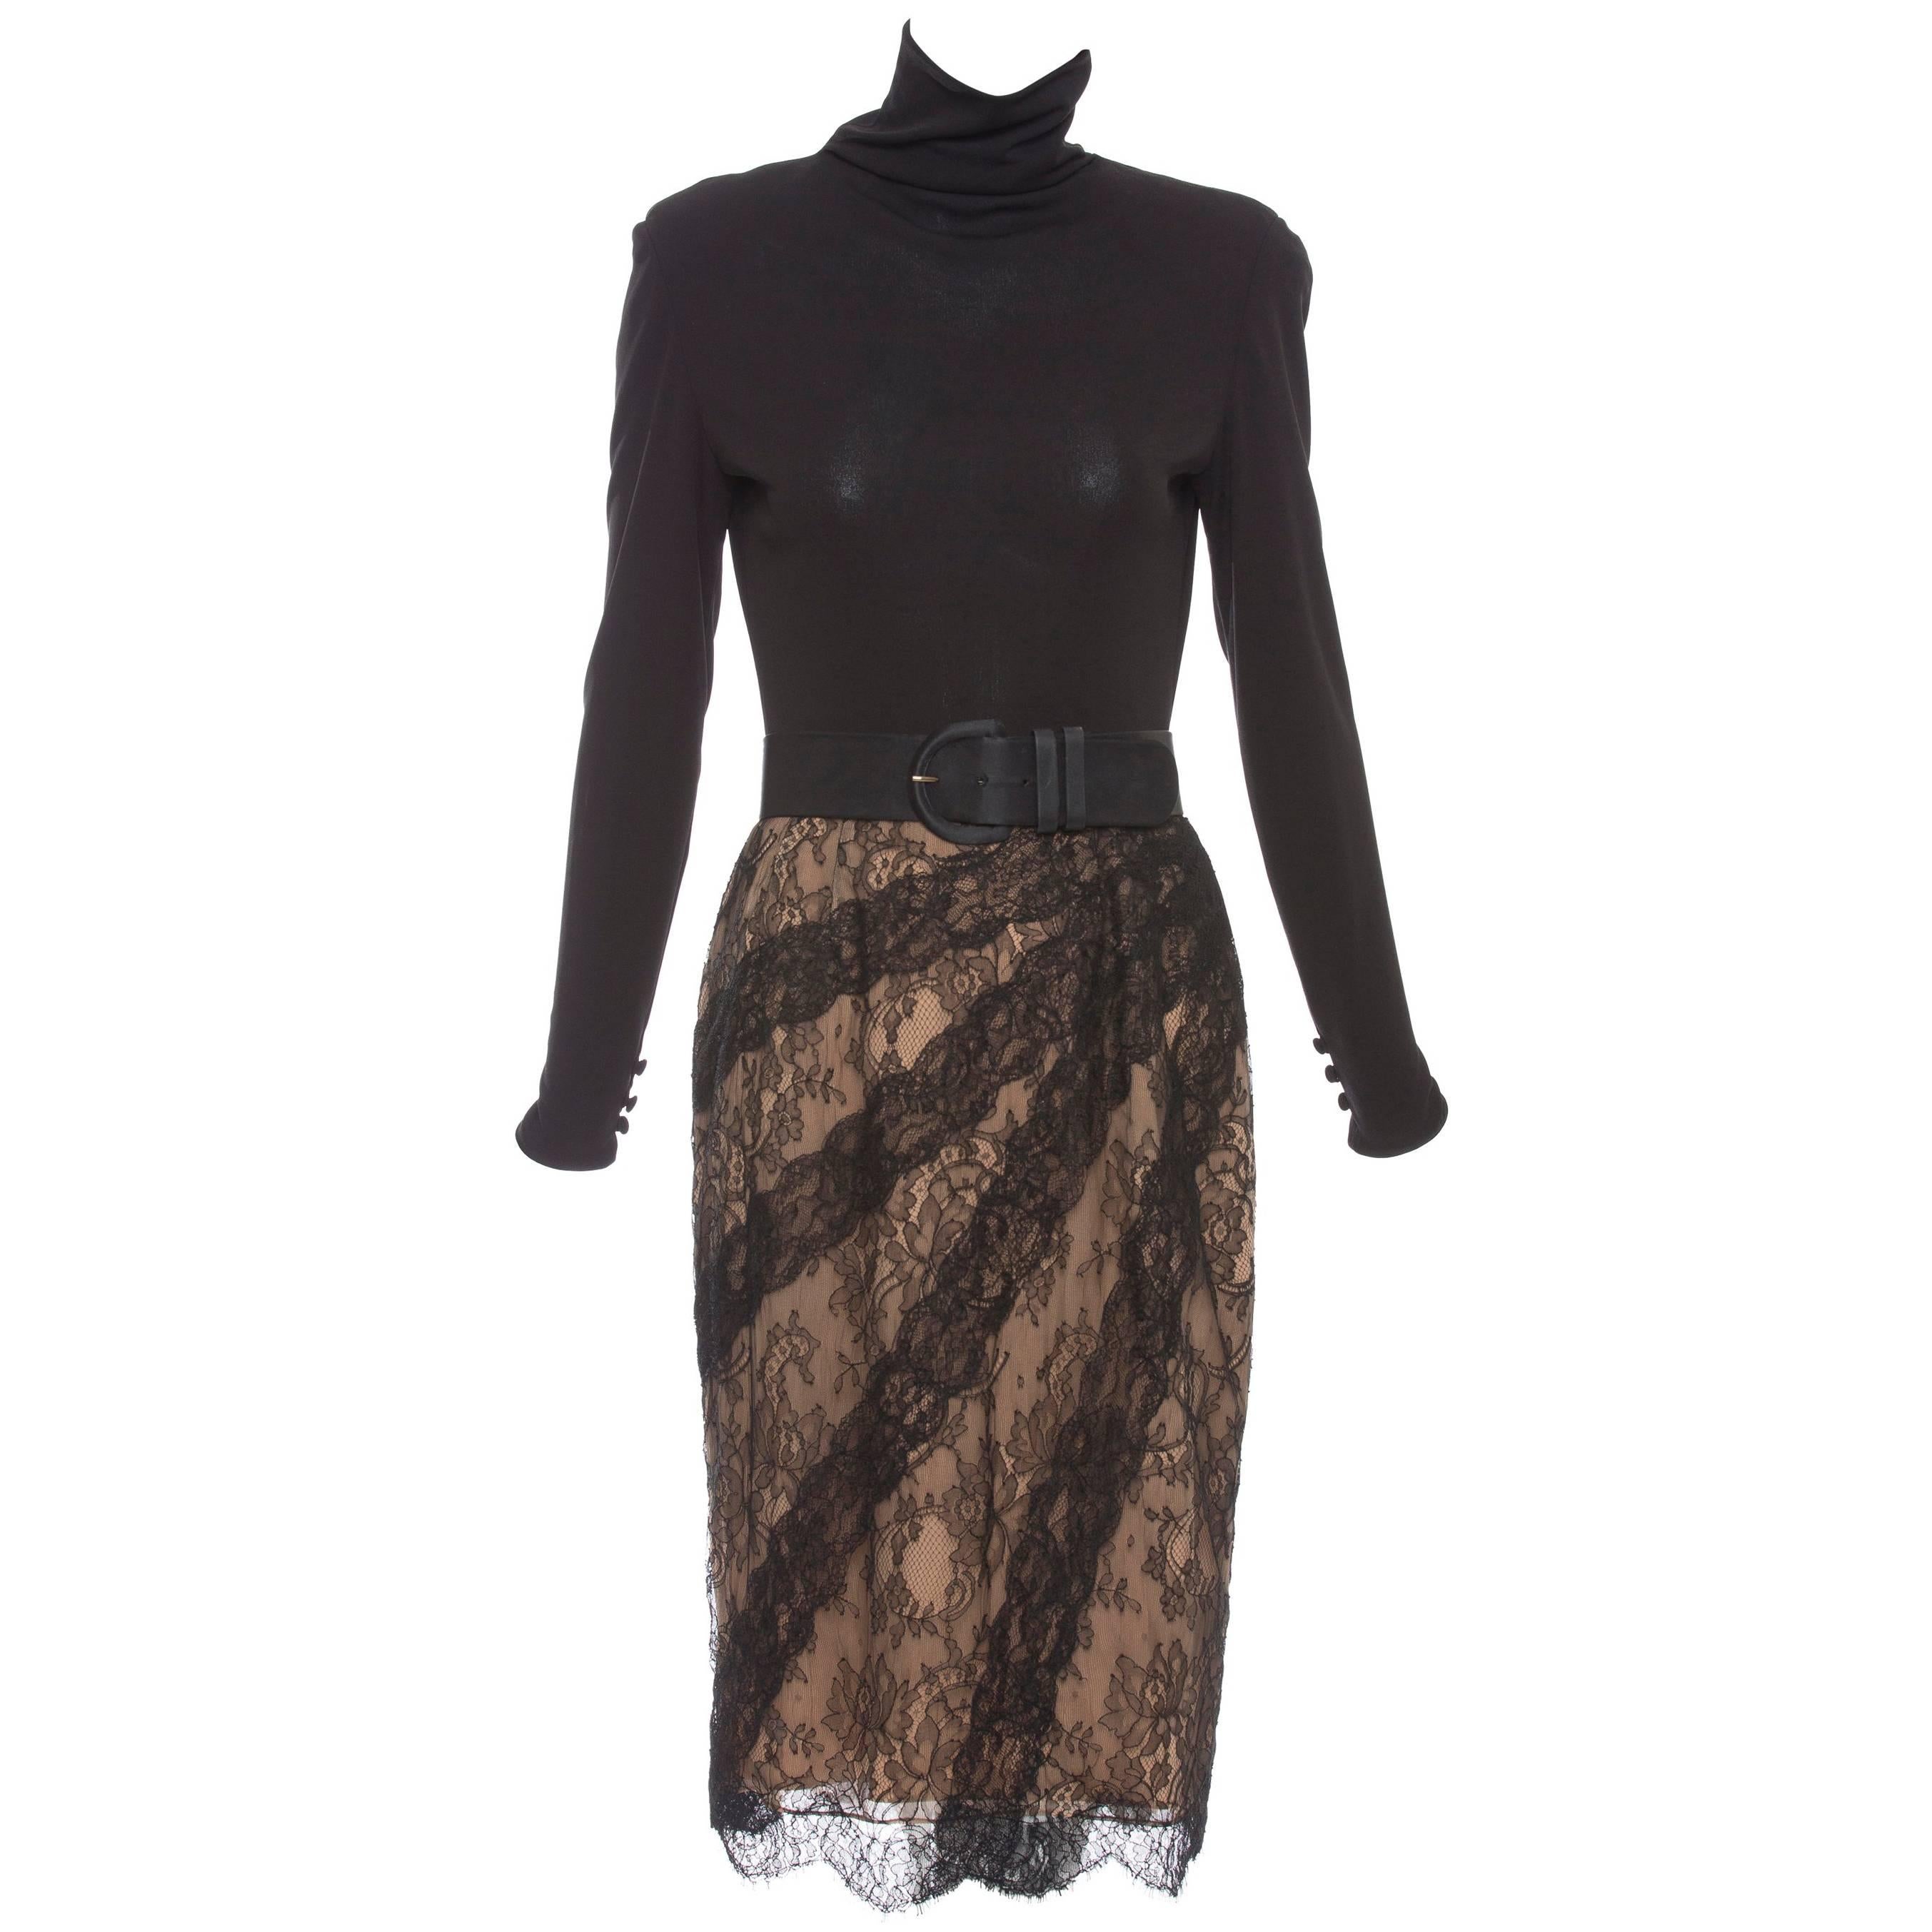 Bill Blass Black Imported Lace Evening Dress, Circa 1980s For Sale